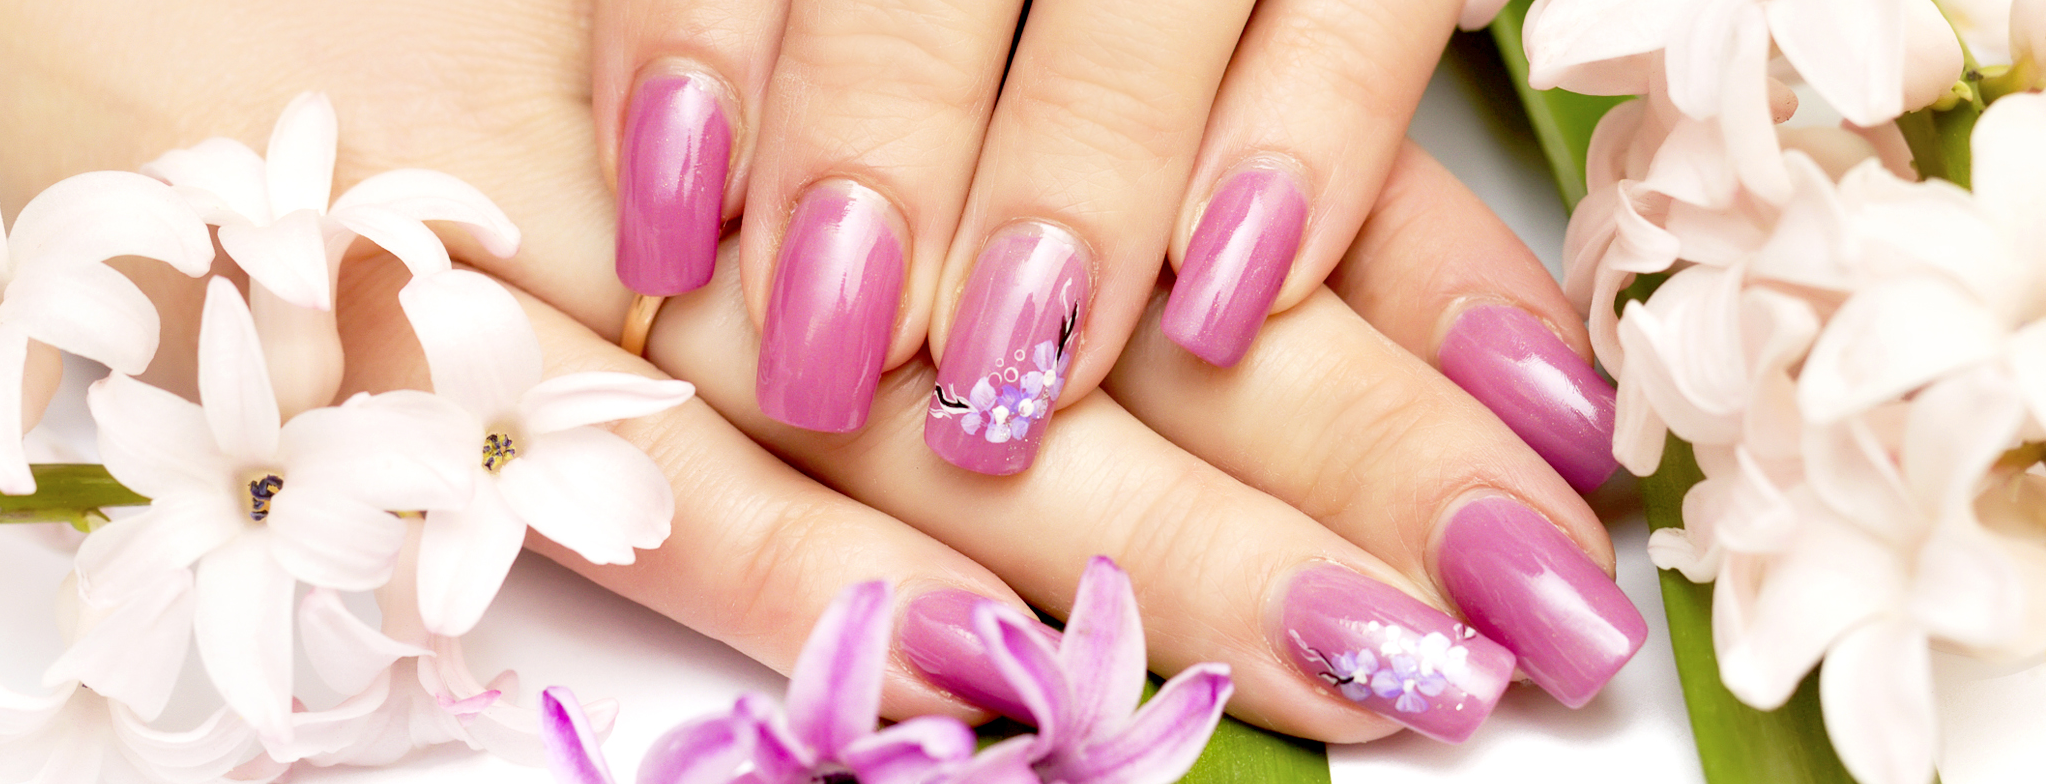 Cashlez | Blog | Get to Know The Nail Art Business Opportunity, From A  Hobby to Cuan!